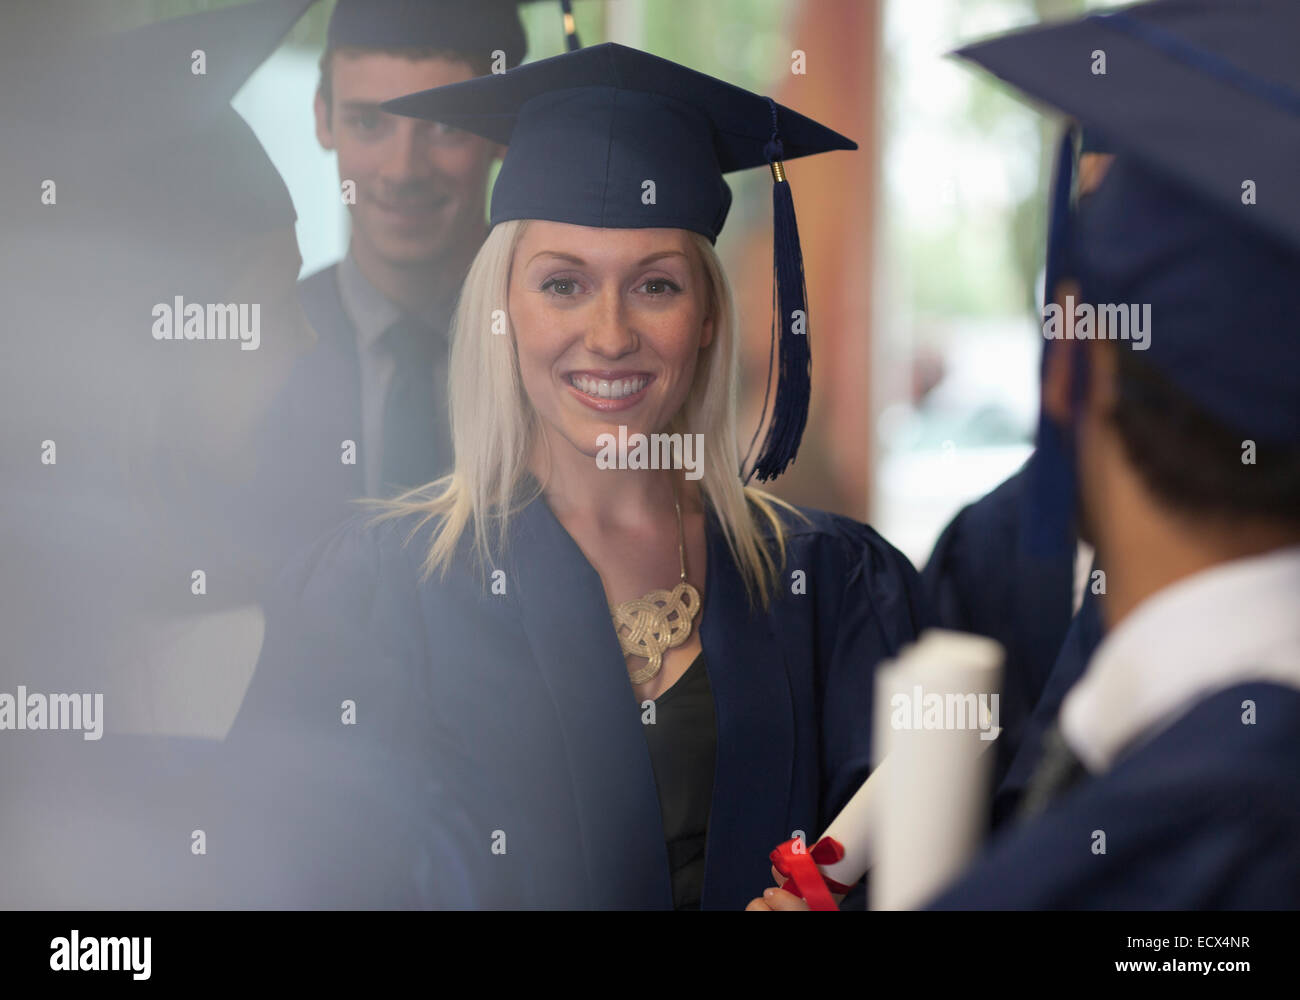 Female student smiling in graduation clothes surrounded by other students Stock Photo